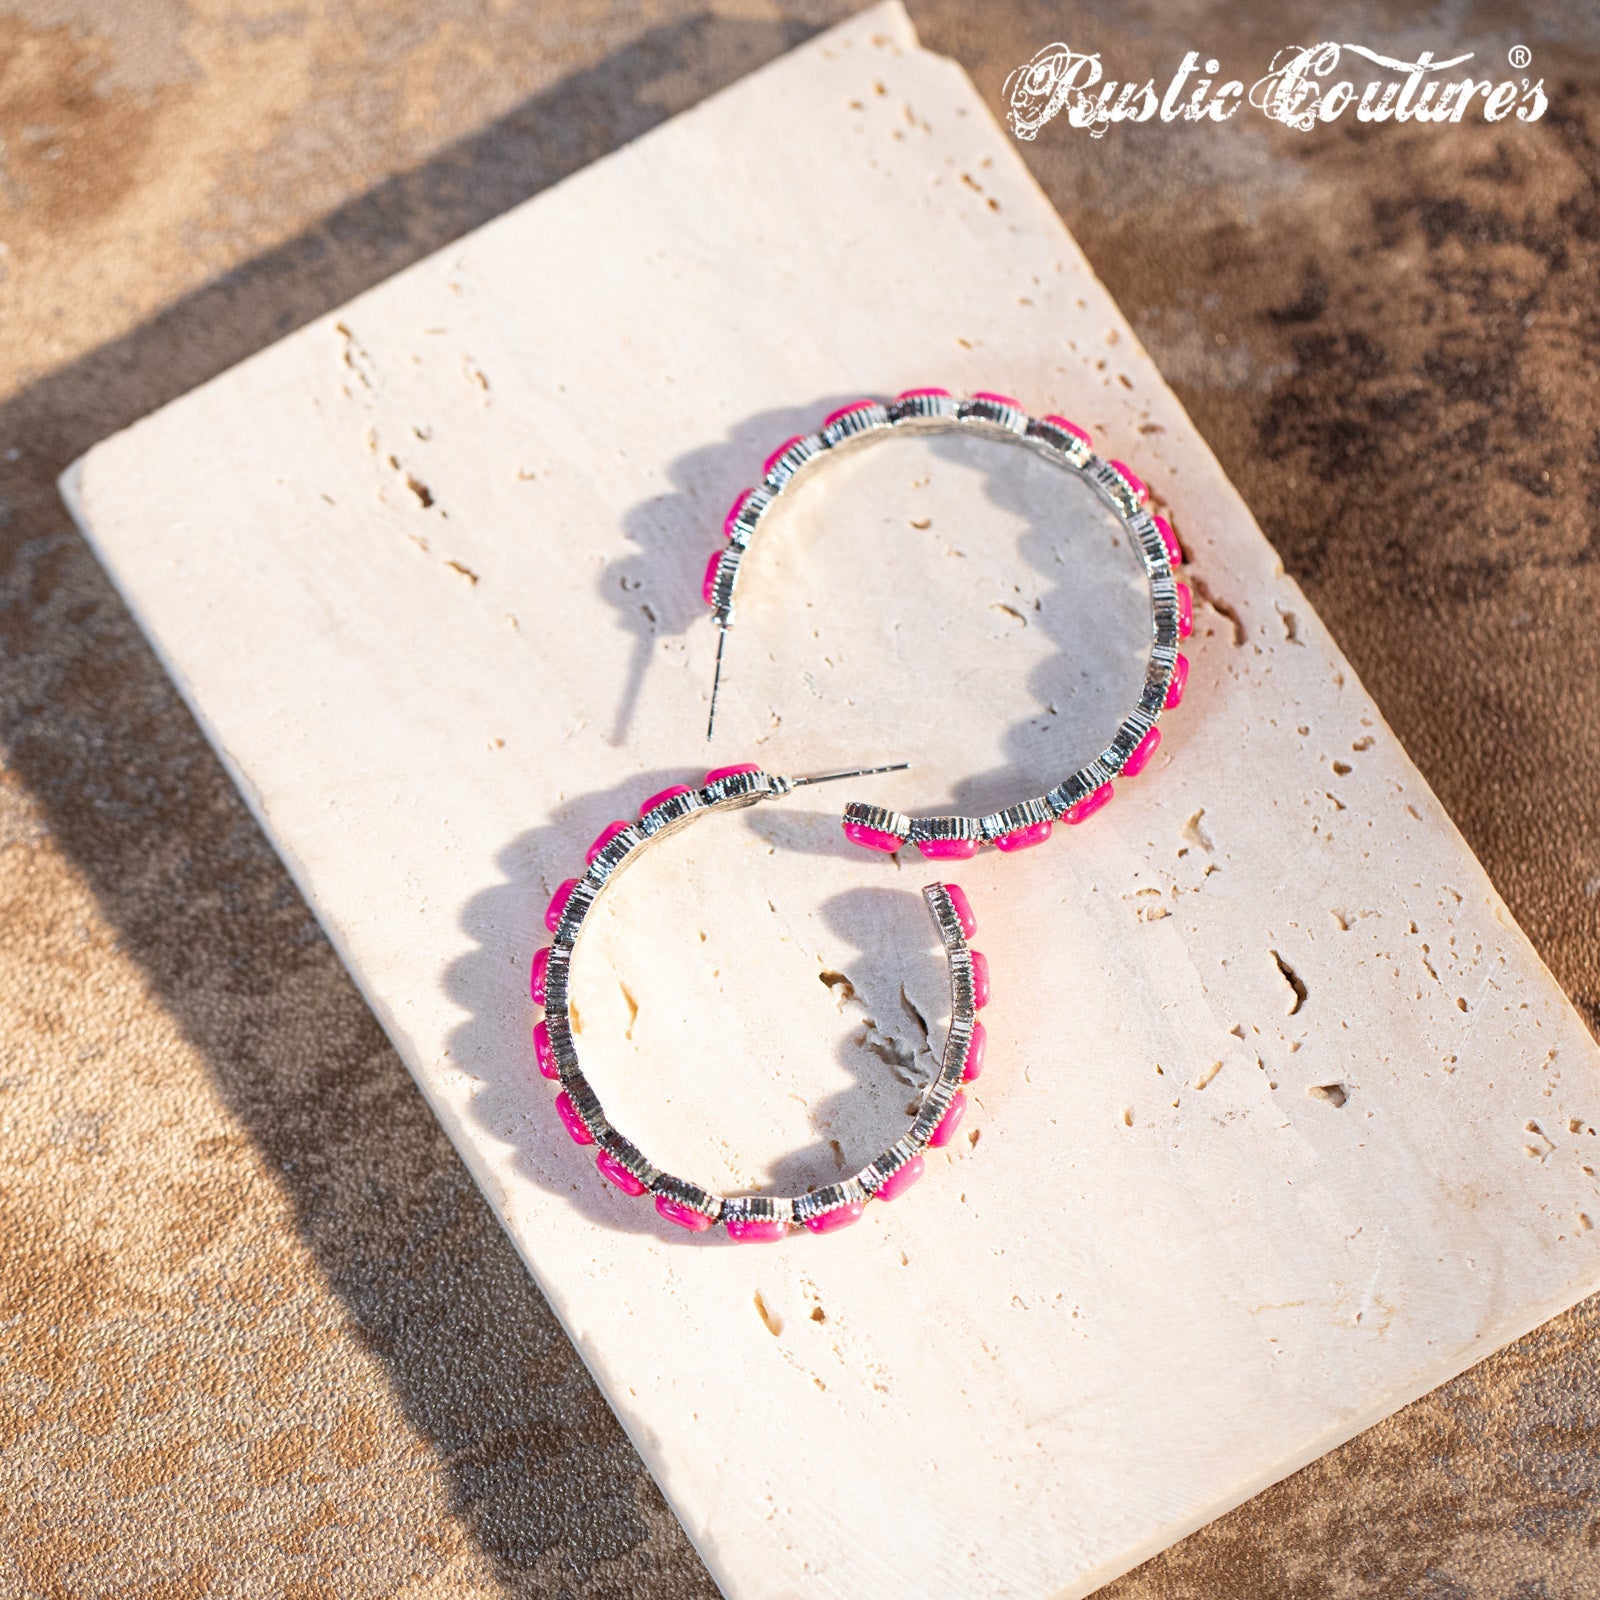 Rustic Couture's Large Silver Base Hot Pink Nature Stone Bead Hoop Earrings - Montana West World